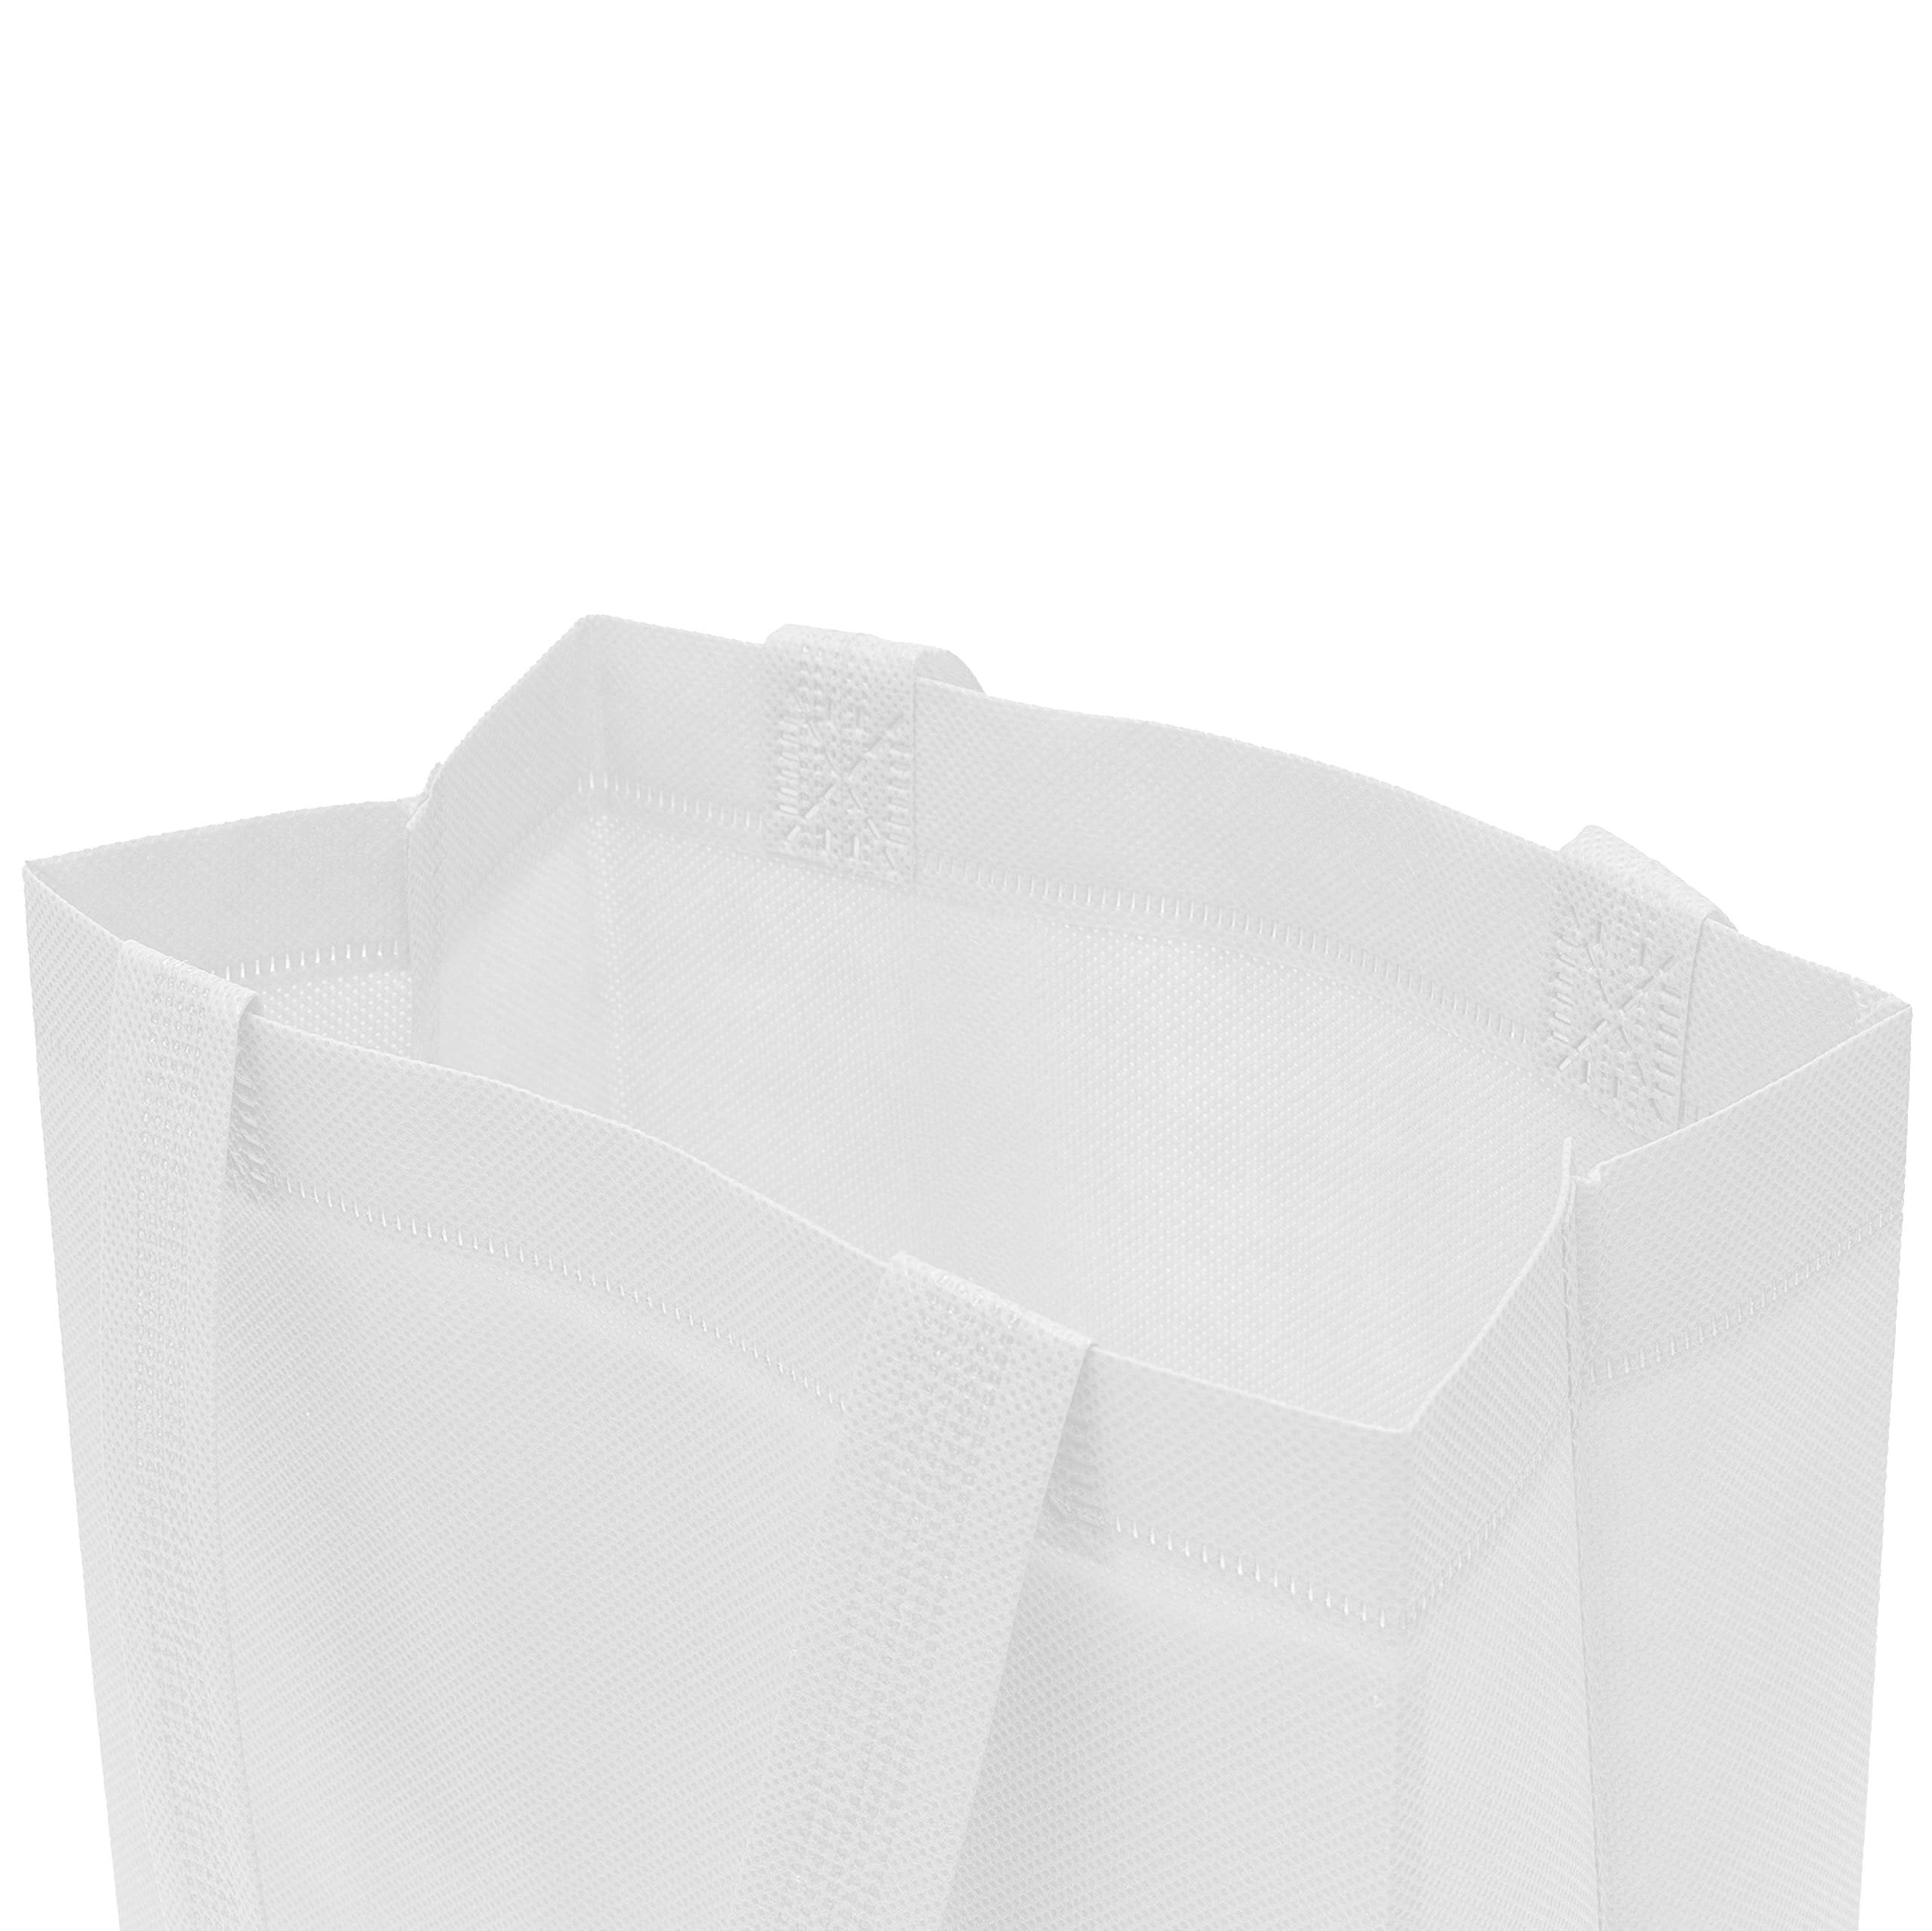 8x4x10 Inch White Reusable Gift Bags - 12 Pack Eco-Friendly Totes for Shopping and Events